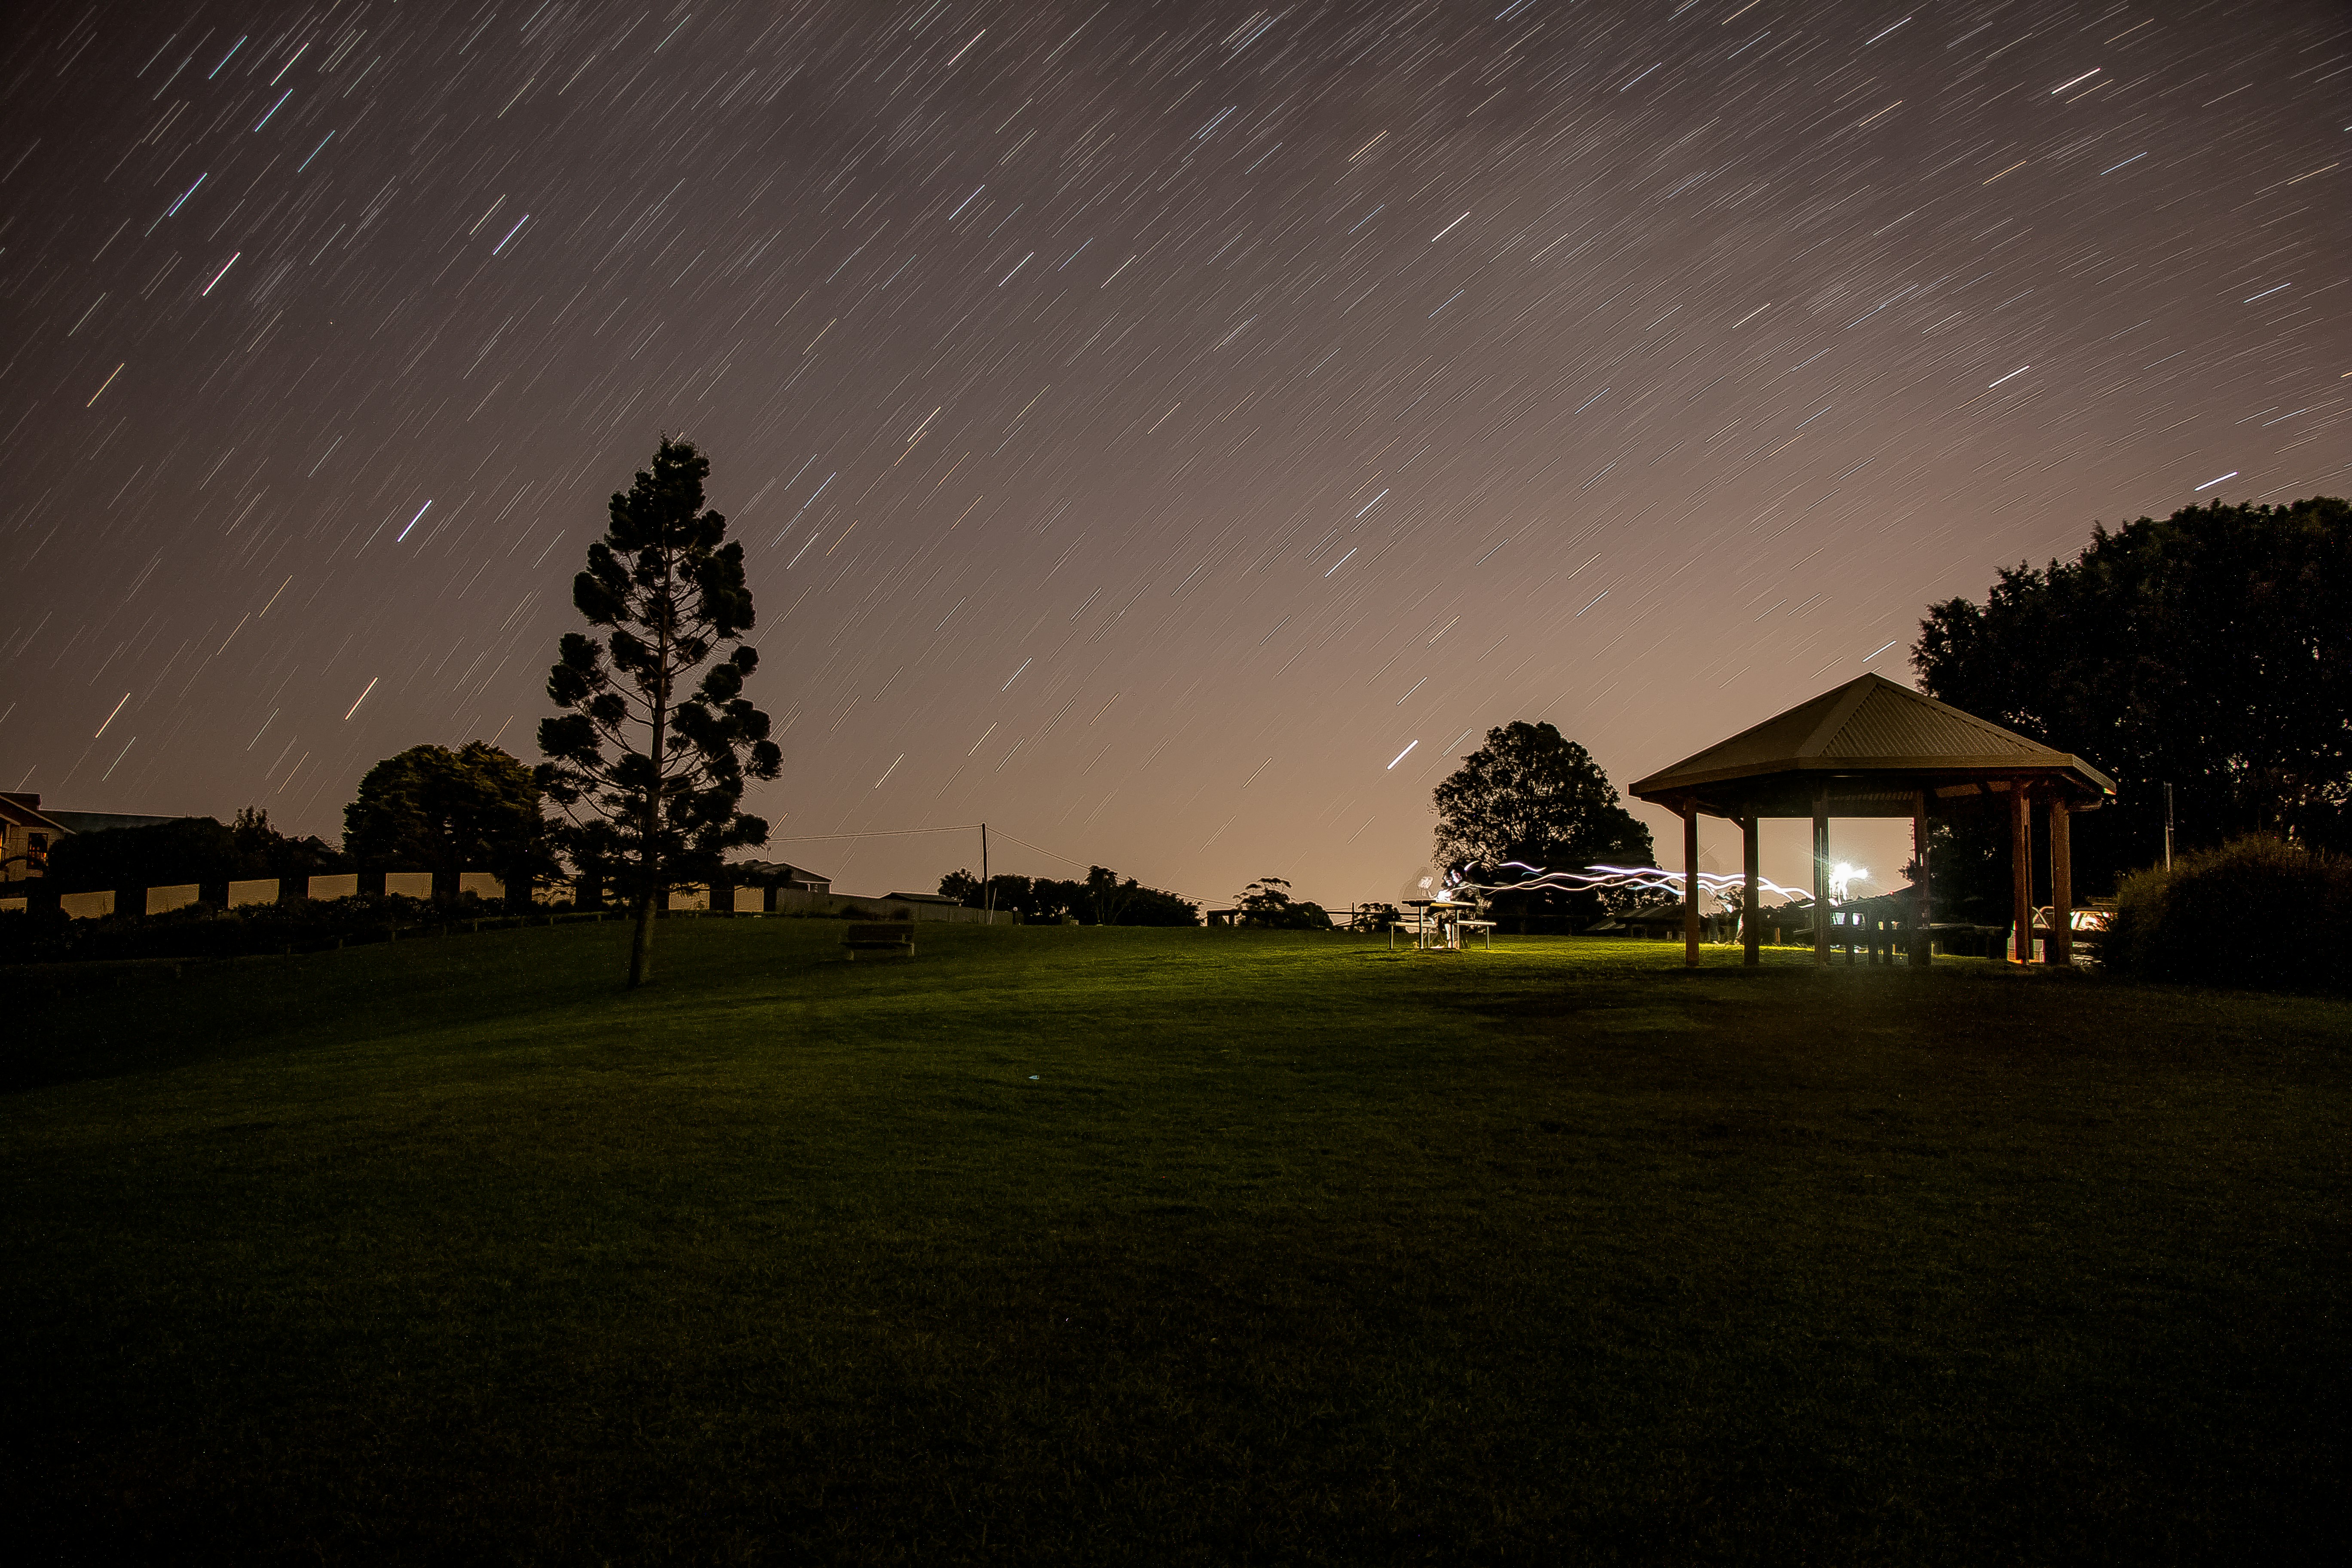 brown gazebo under starry night in time lapse photography